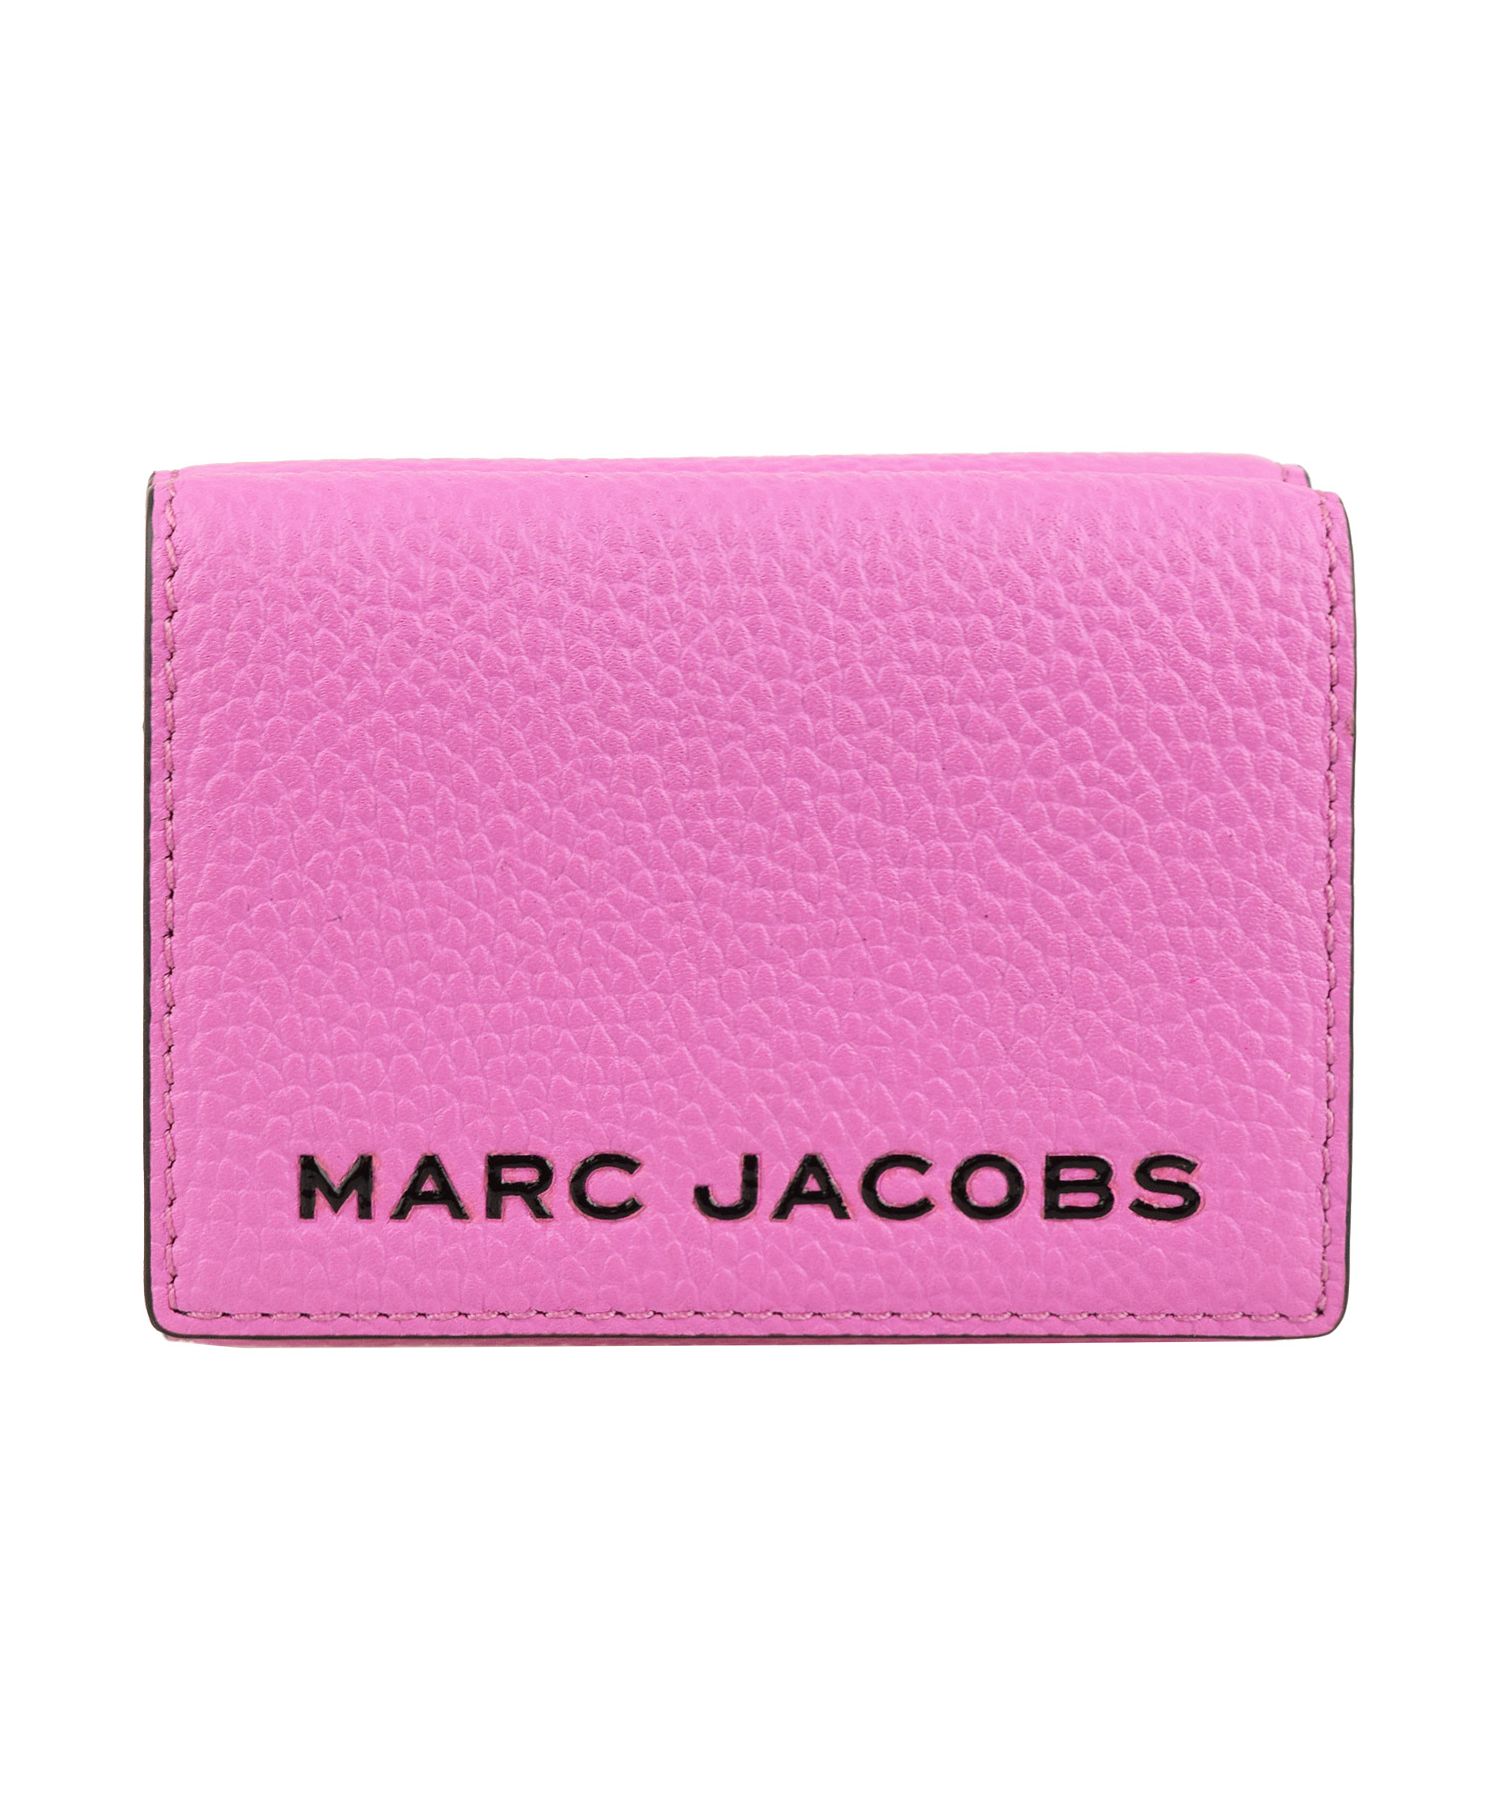 【MARC JACOBS(マークジェイコブス)】MARC JACOBS マークジェイコブス THE BOLD MEDIUM TRIFOLD